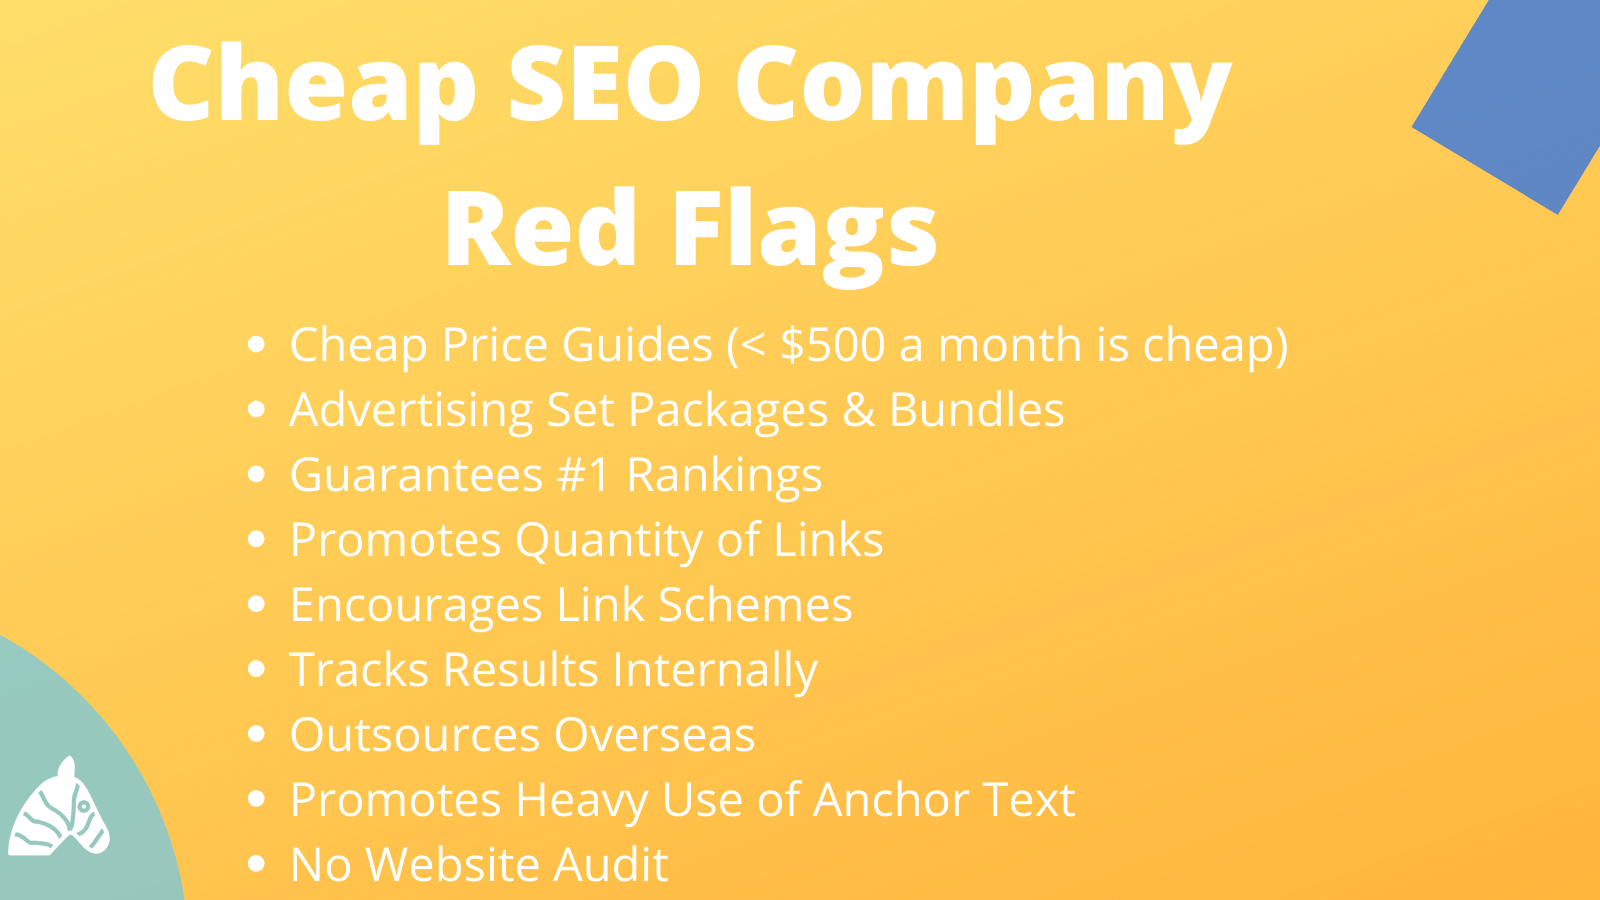 Warning Signs for cheap SEO packages